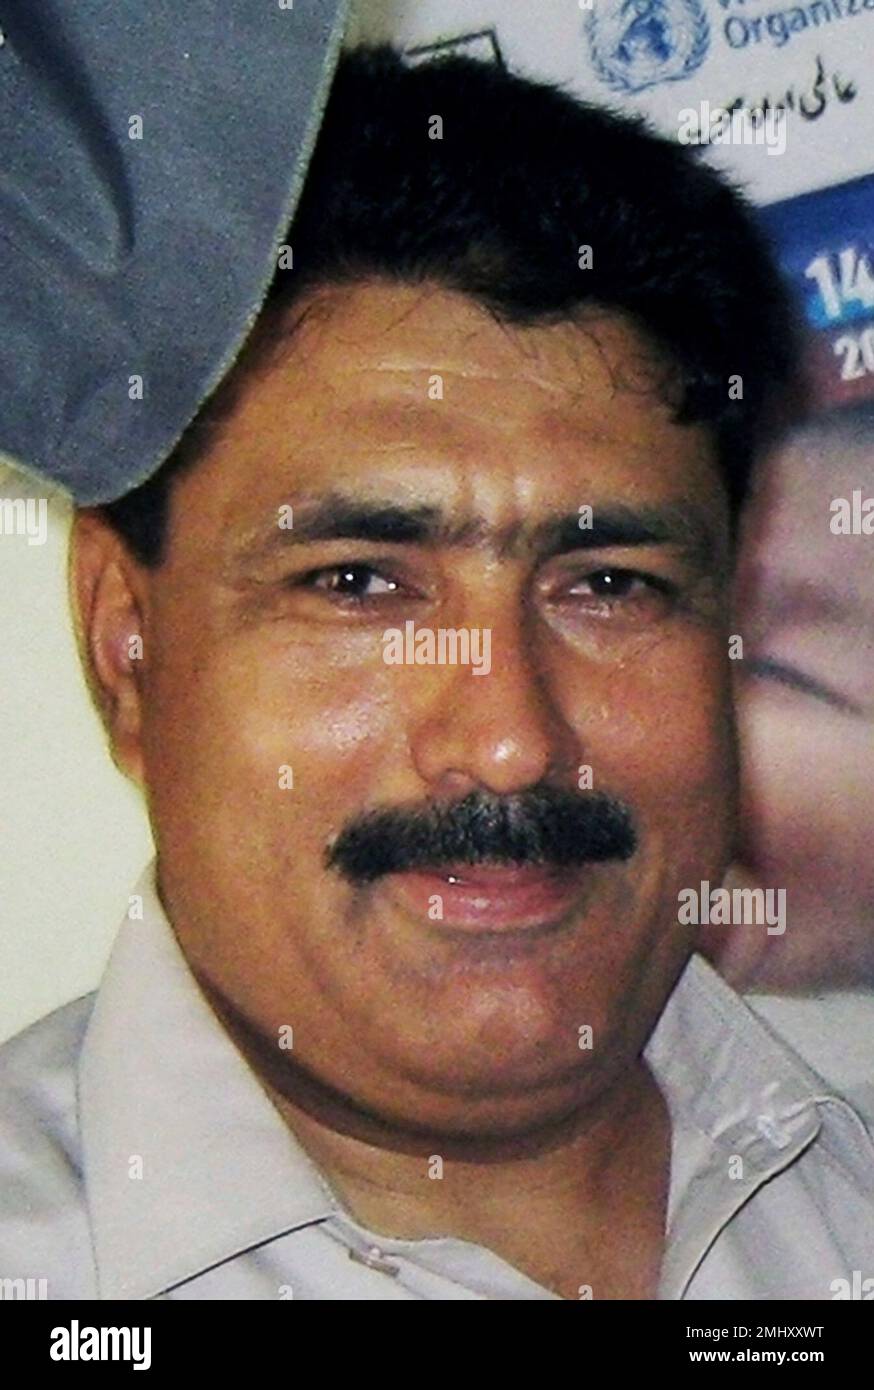 FILE - In this July 9, 2010 file photo, Pakistani doctor Shakil Afridi is  photographed in Pakistan's tribal area of Jamrud in Khyber region. A  Pakistani court has given the prosecution two